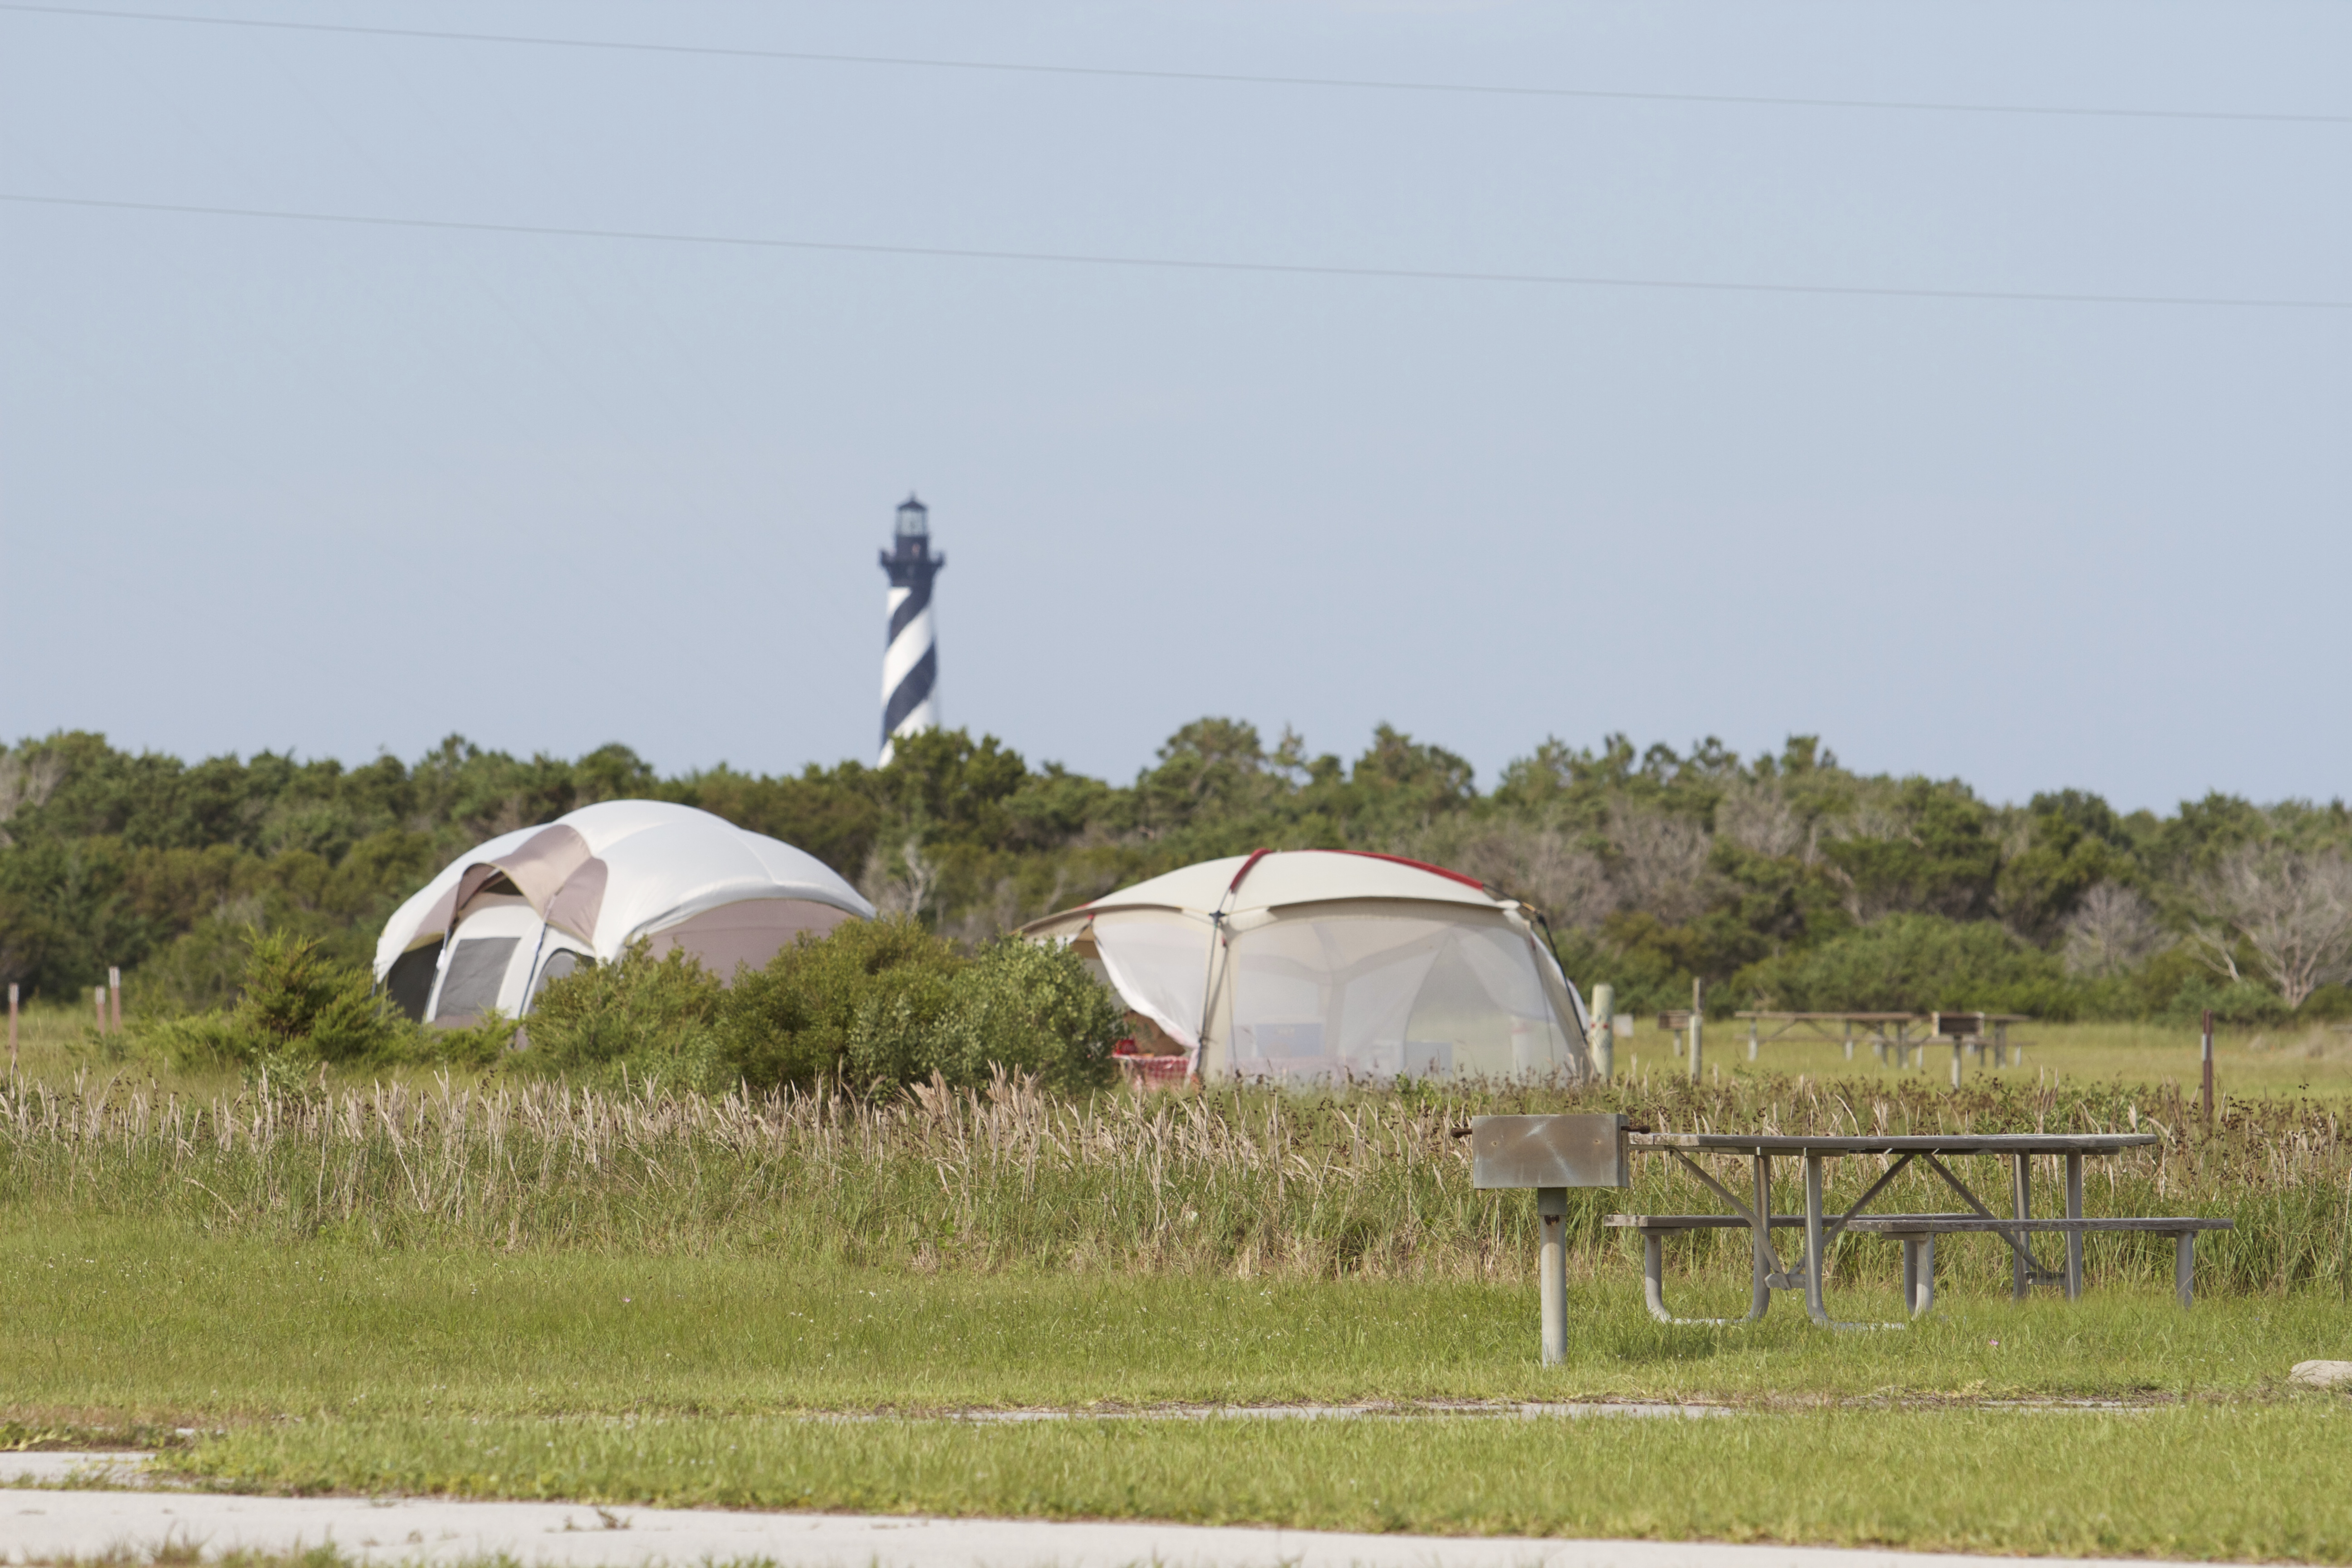 Two tents and the Cape Hatteras Lighthouse visible behind a grassy camp site.